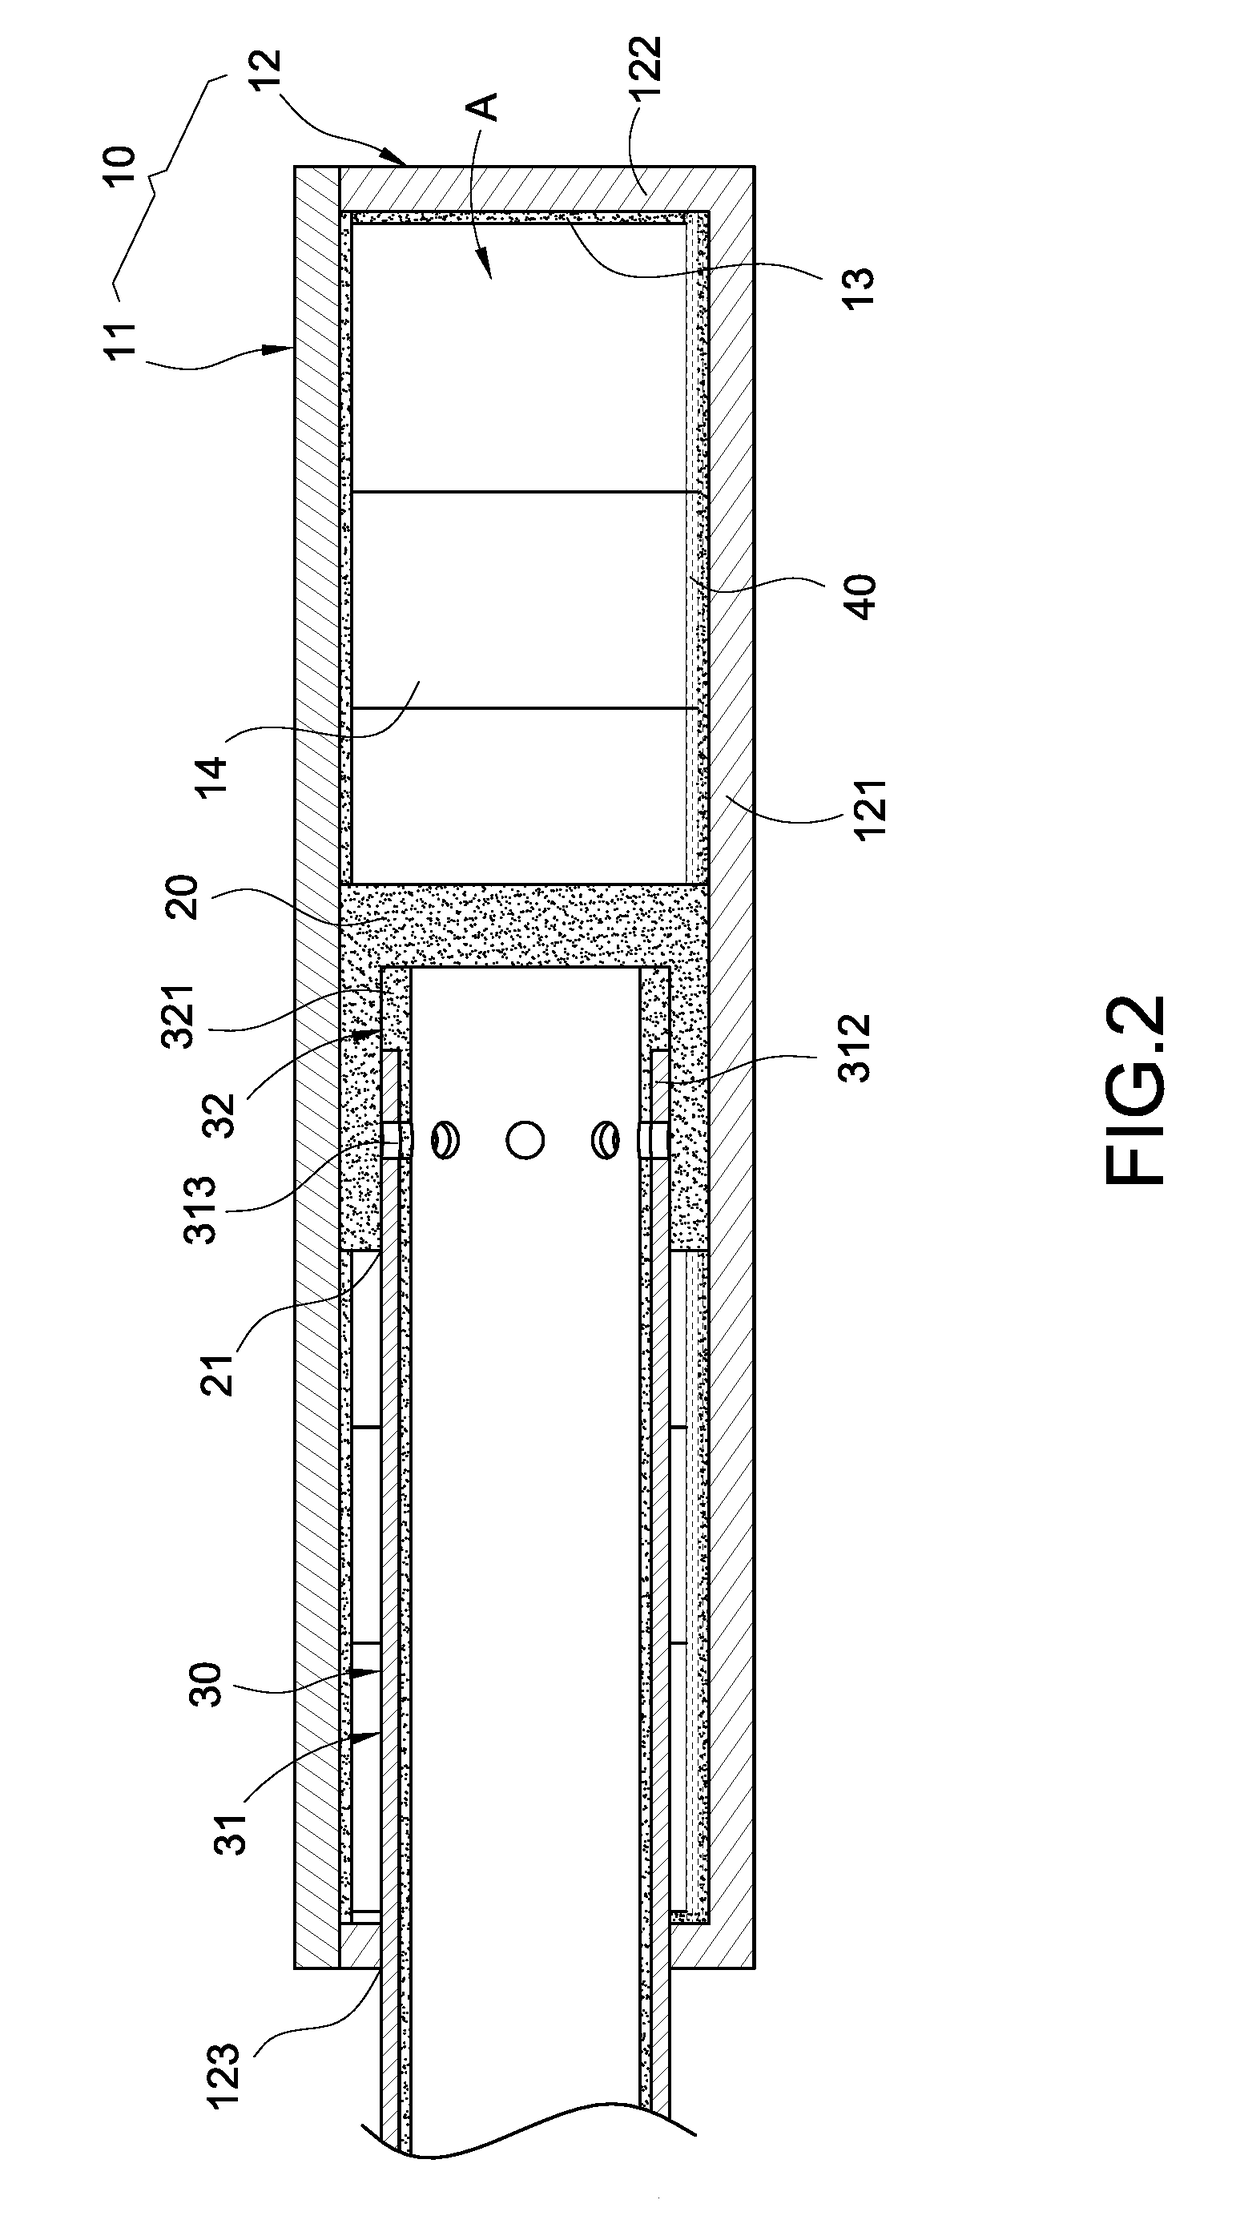 Vapor chamber and heat pipe combined structure